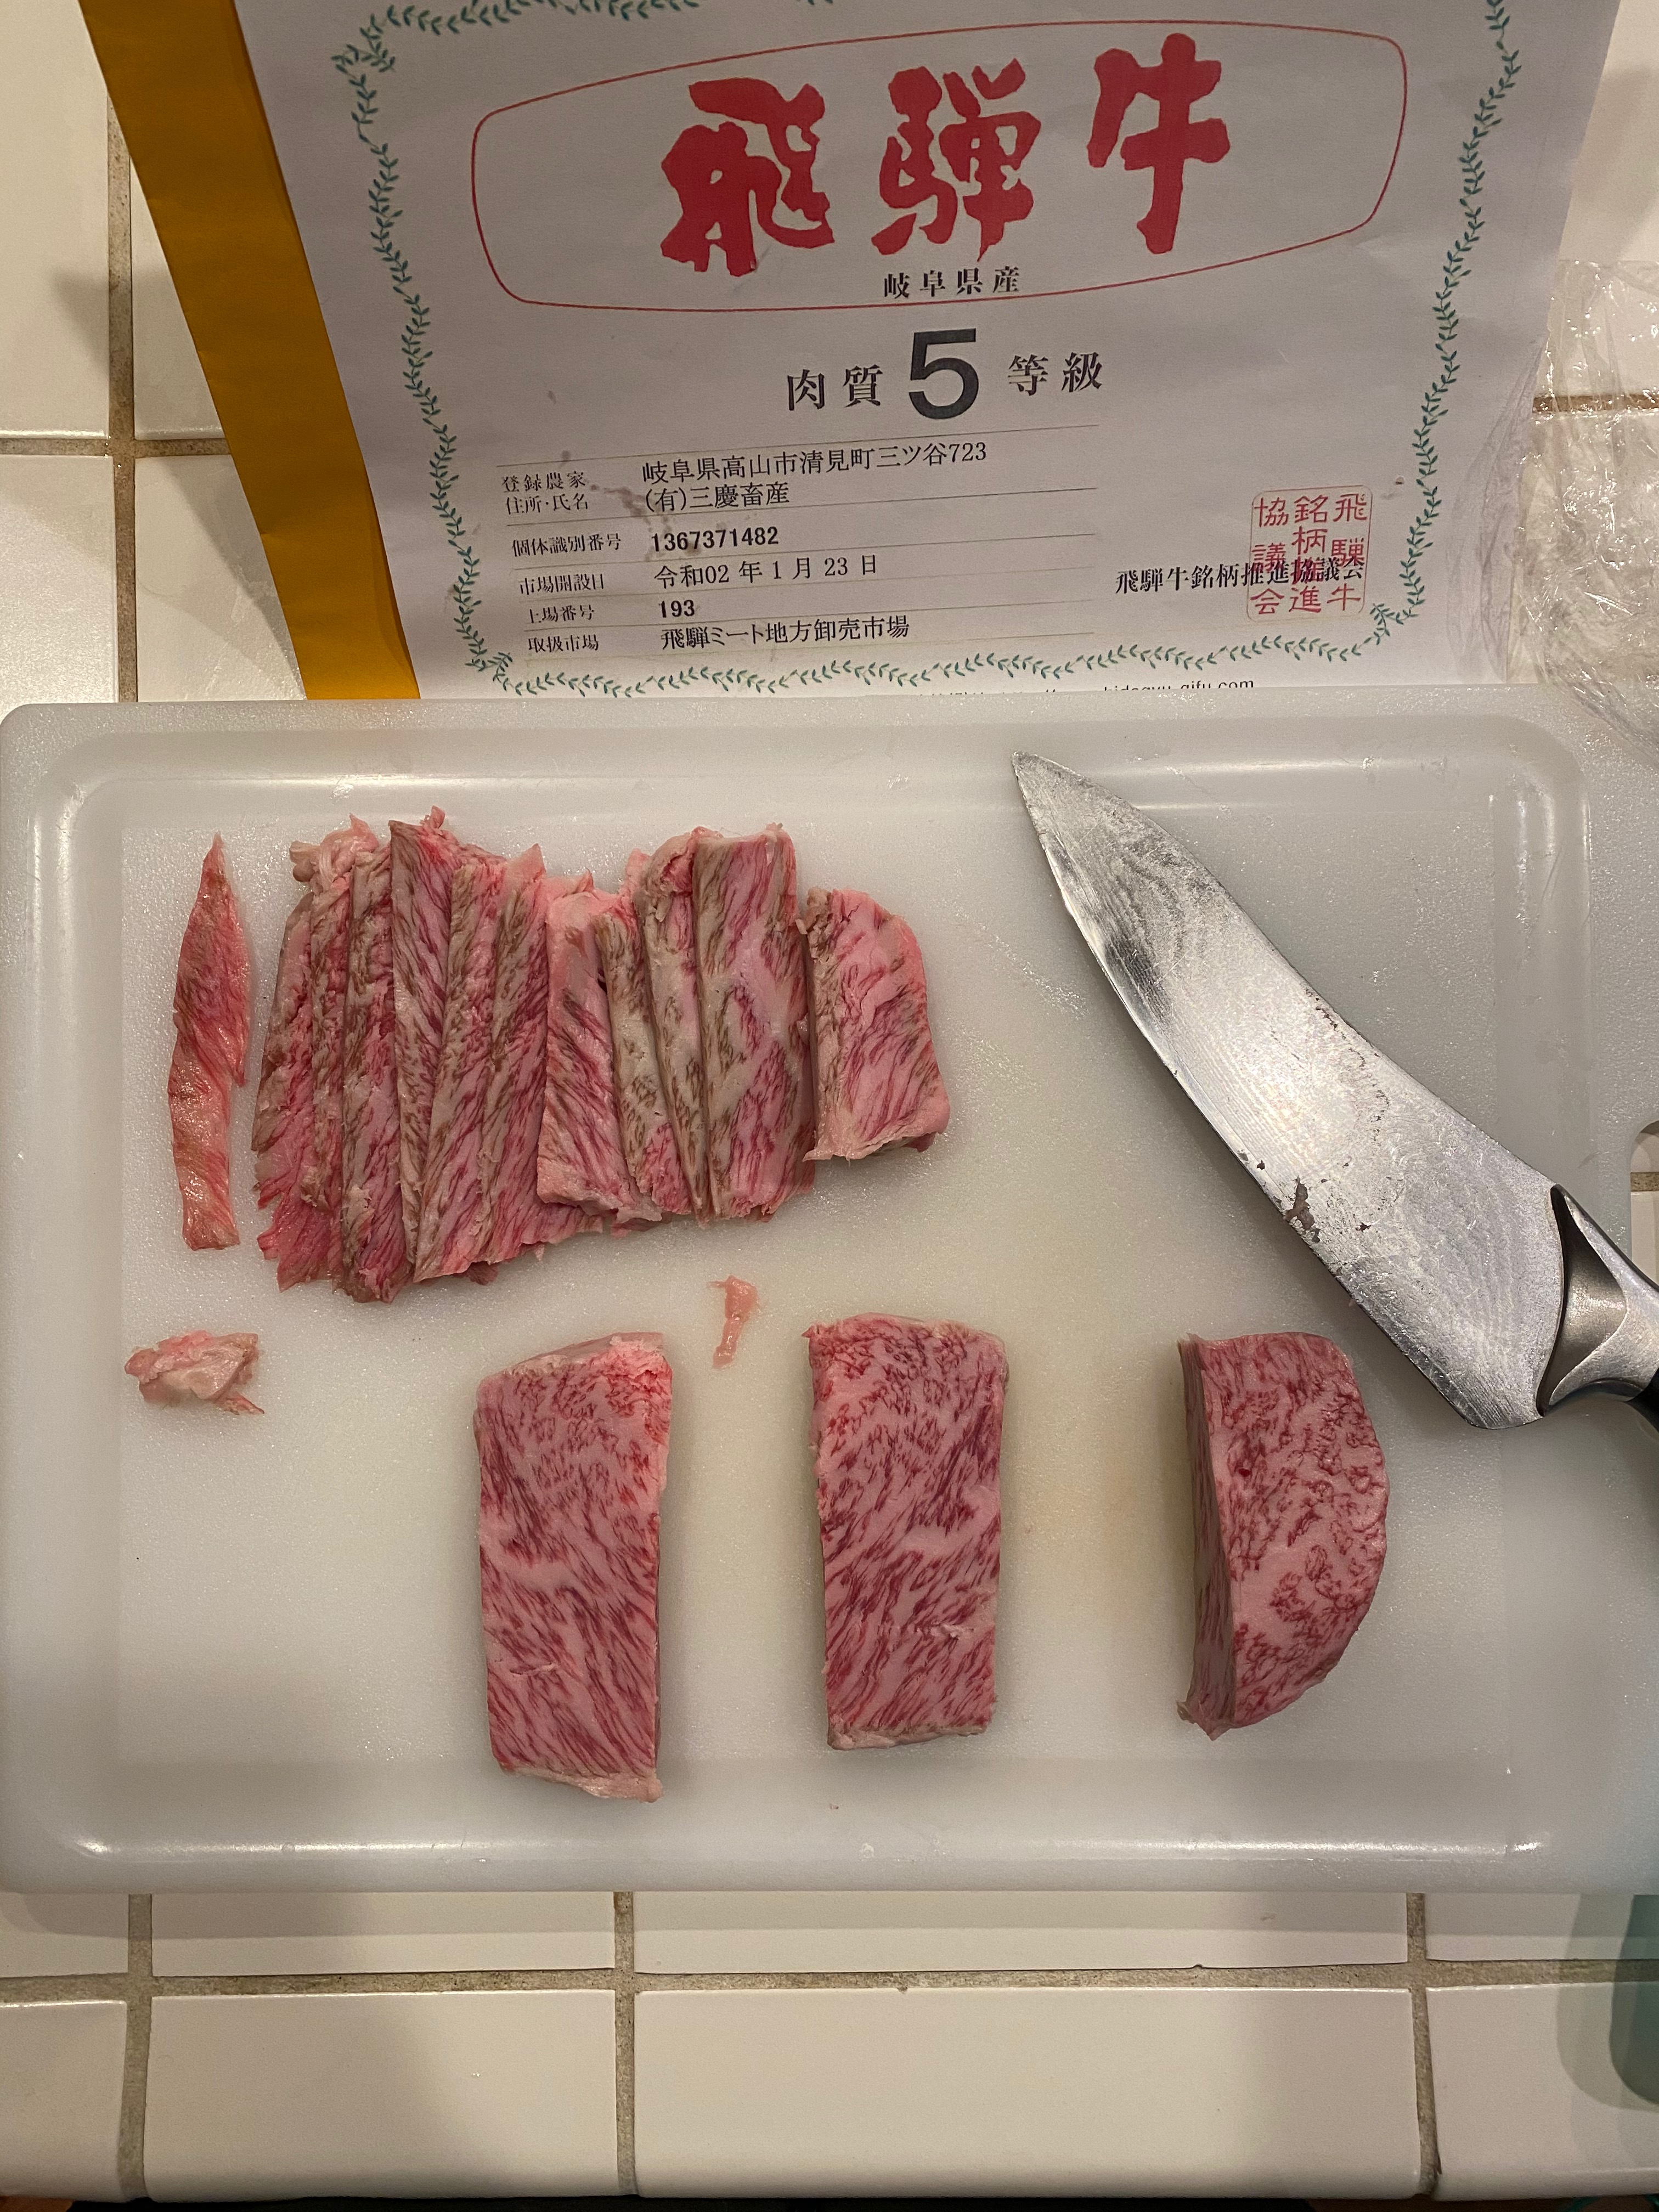 Figure 4: Sliced to different thickness. We did 3 cuts: thin strips for sushi, 1-inch thickness, and 2-inch thickeness.